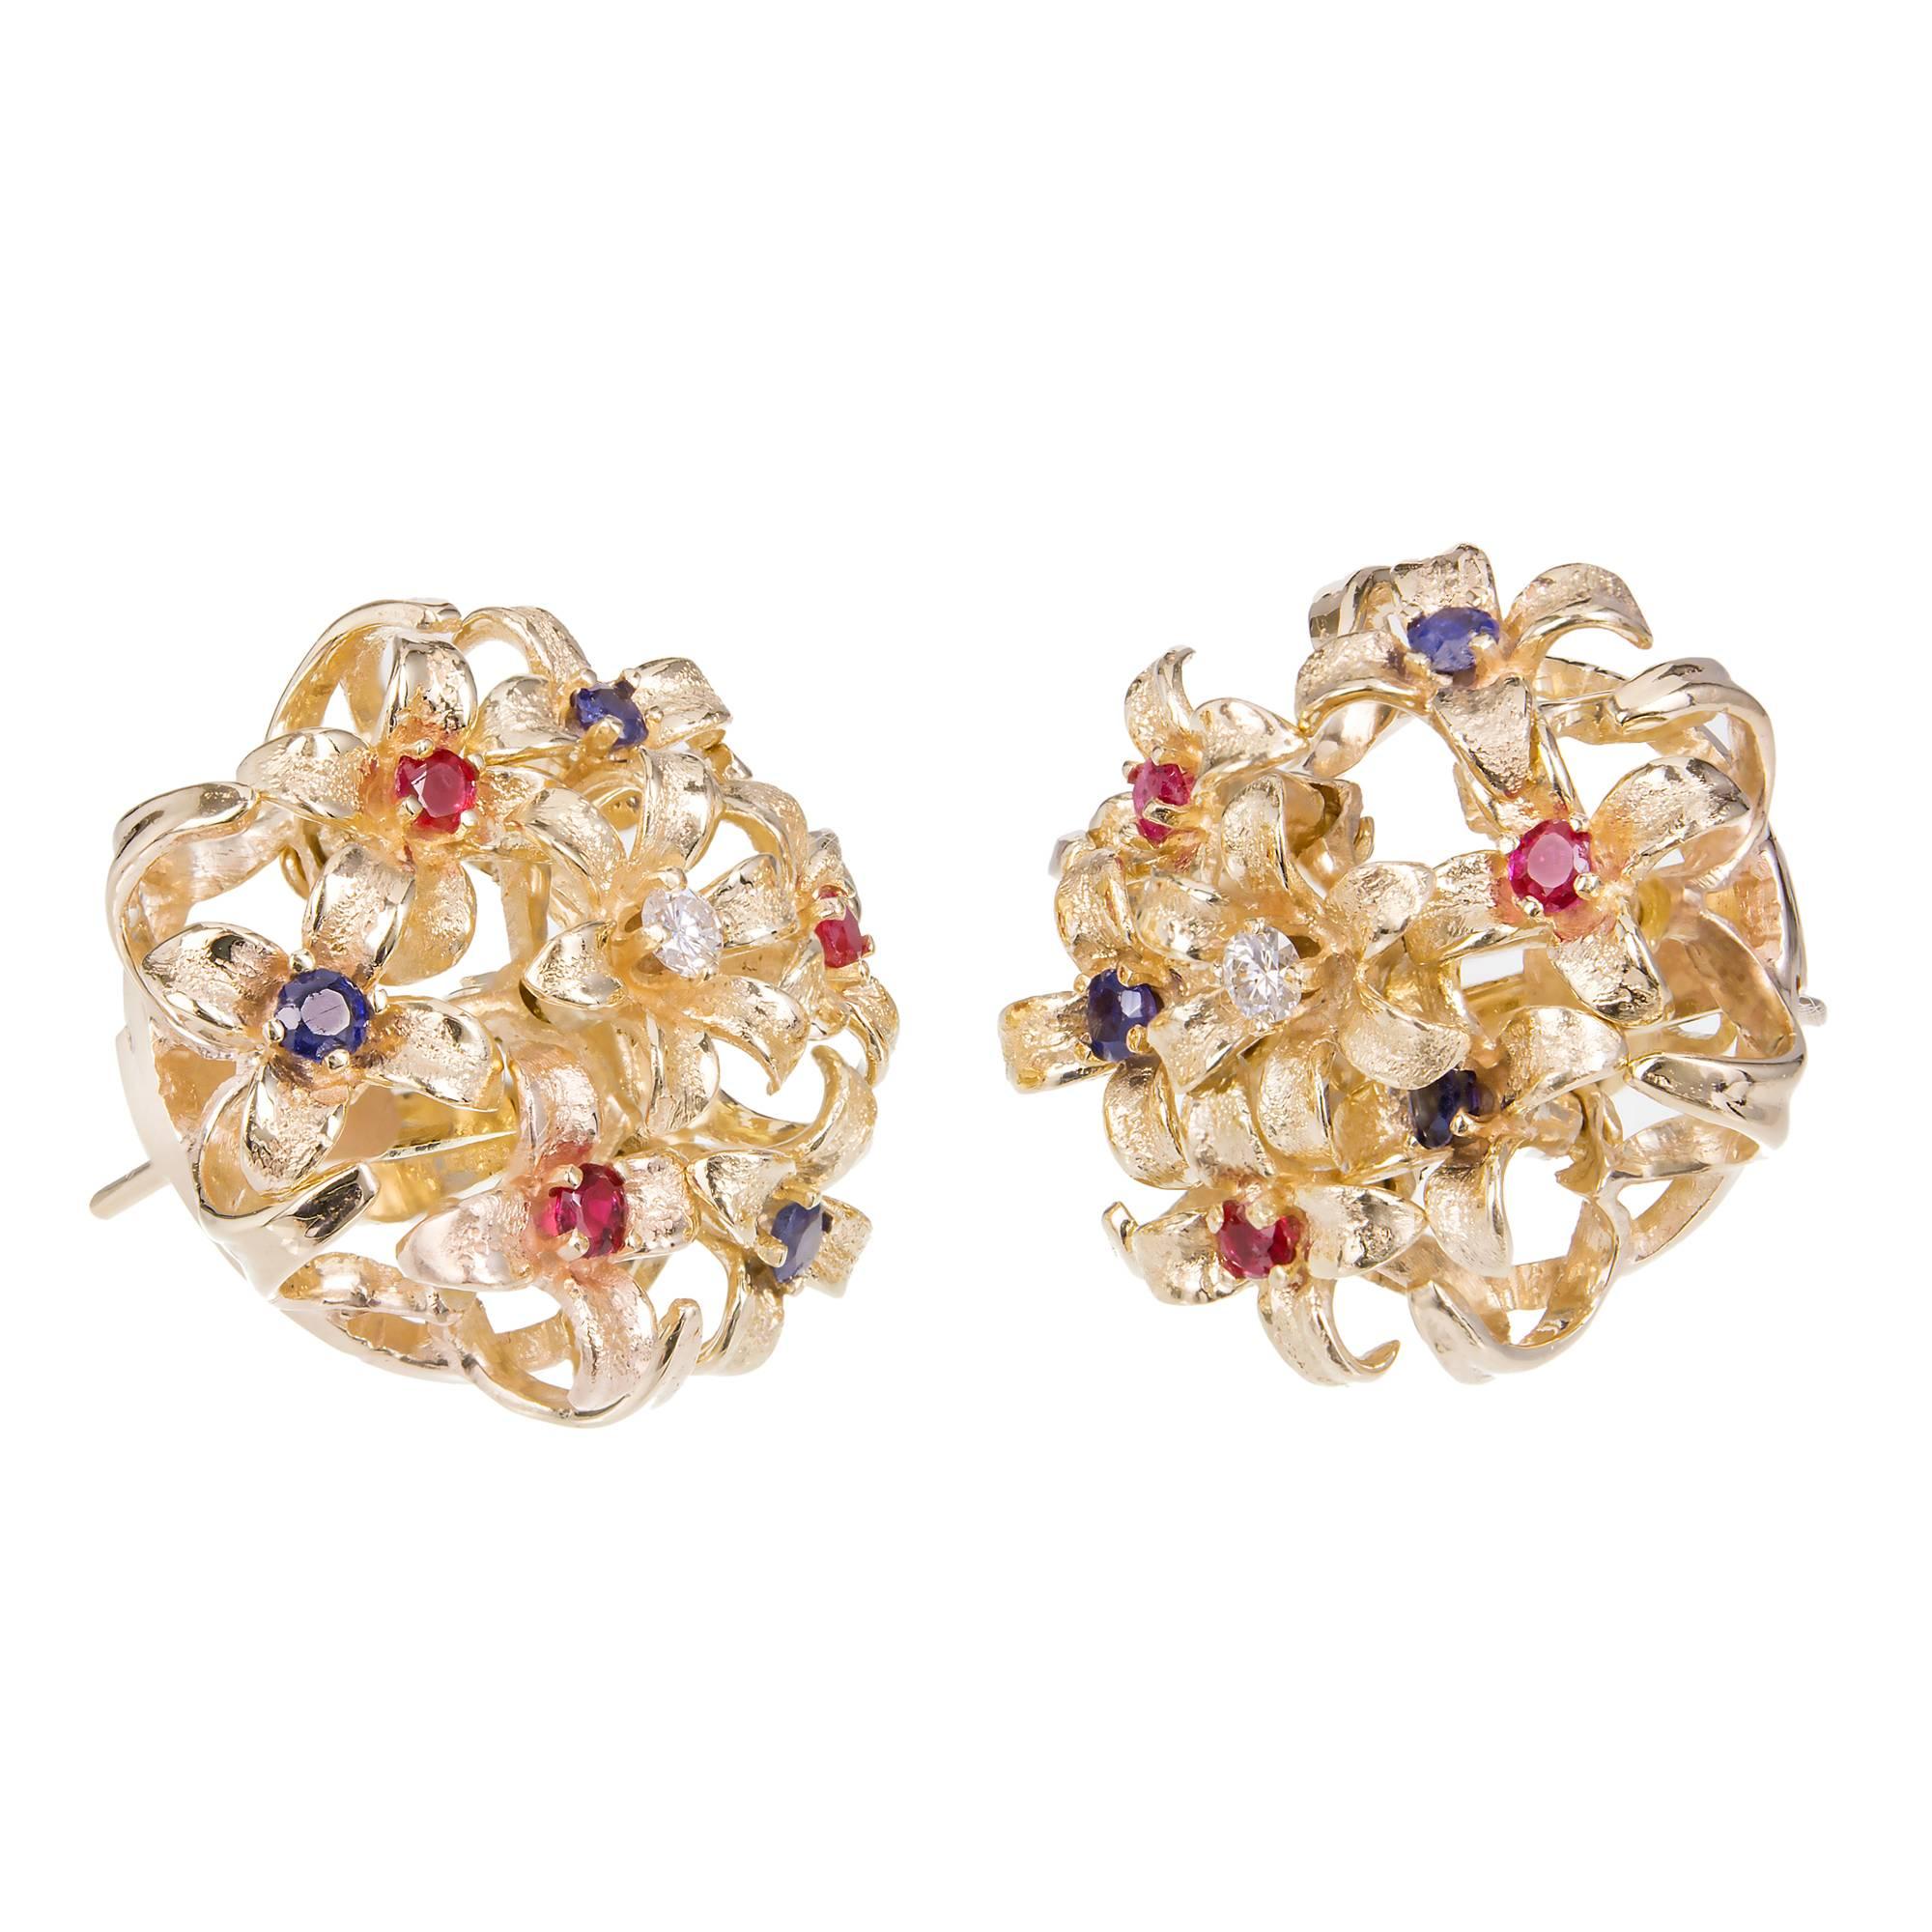 1950-1960 En Tremblant flower earrings set with round Sapphires, Rubies and Diamonds in a flower 14k yellow gold setting. Clip and post style.

6 round blue Sapphires, 2mm  approx total weight. .30ct
6 round red Rubies, 2mm  approx total weight